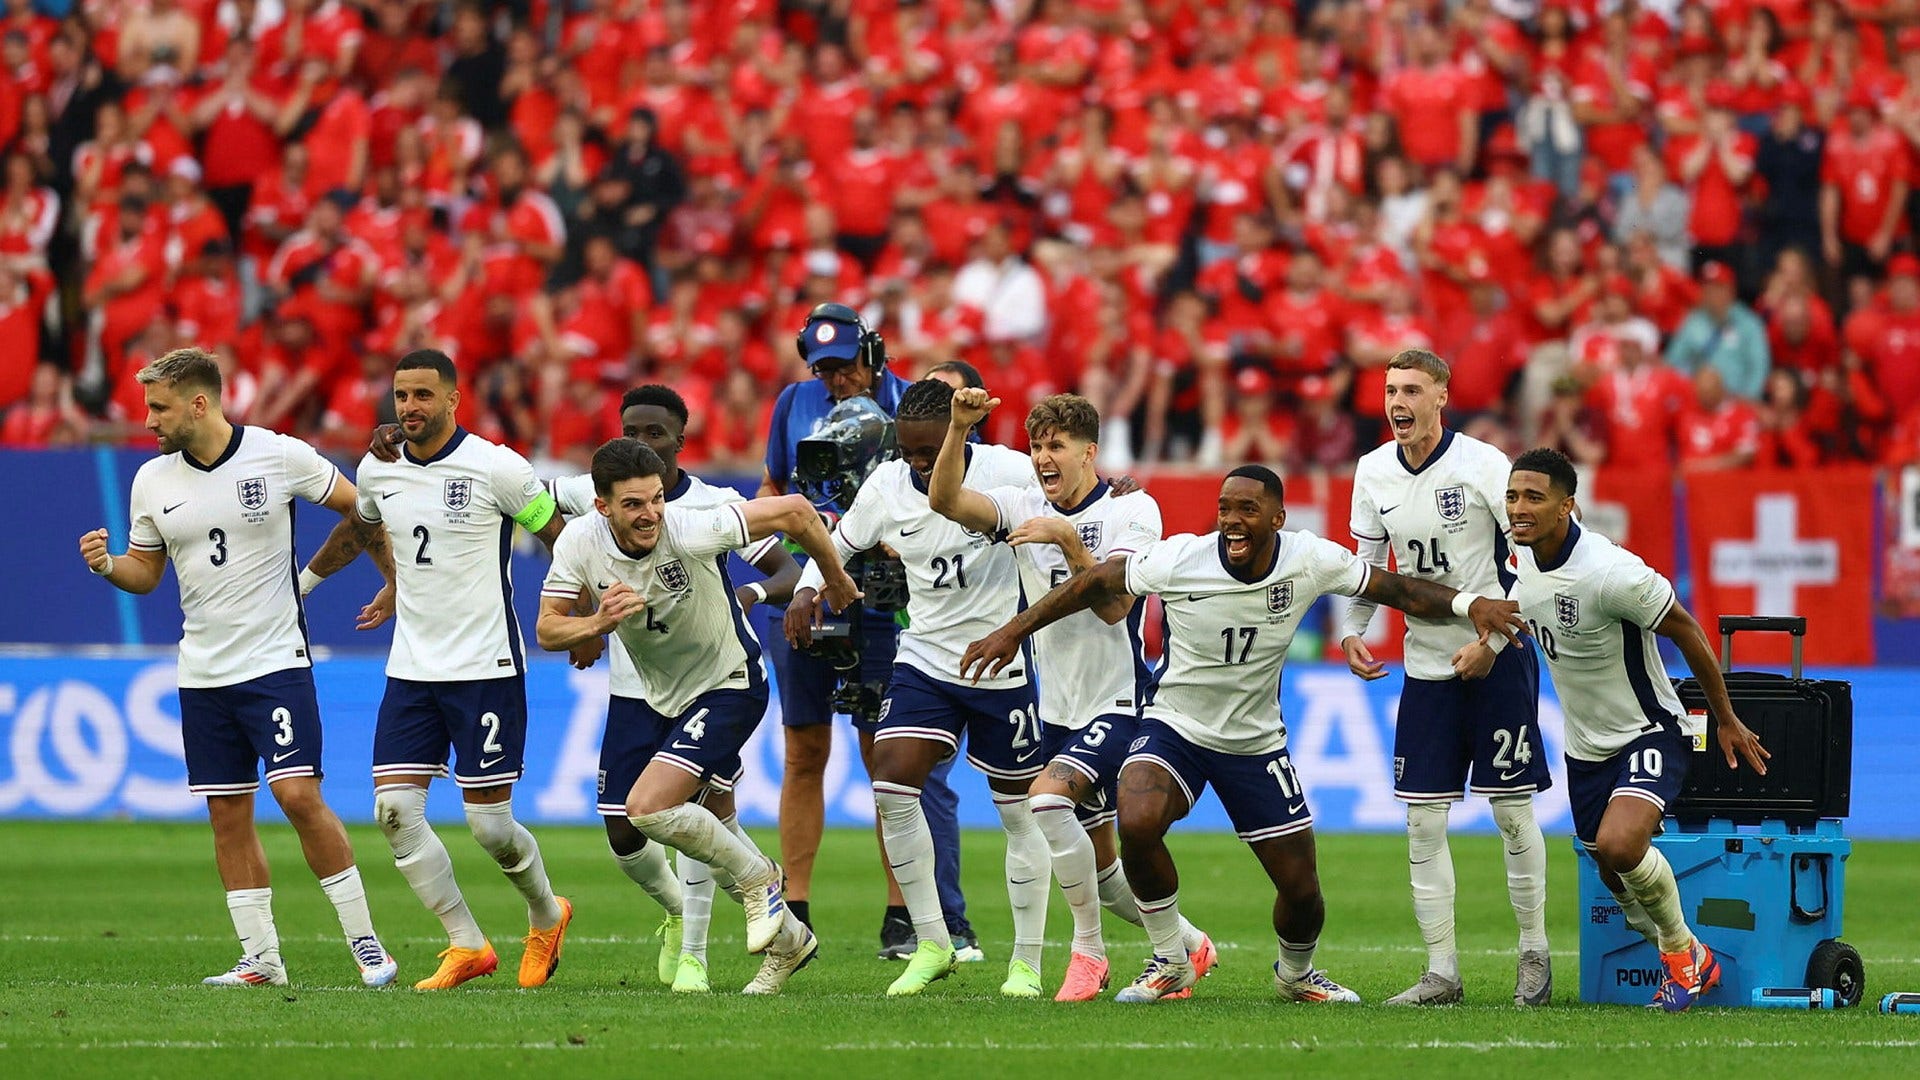 England got revenge by beating Switzerland after a dramatic penalty